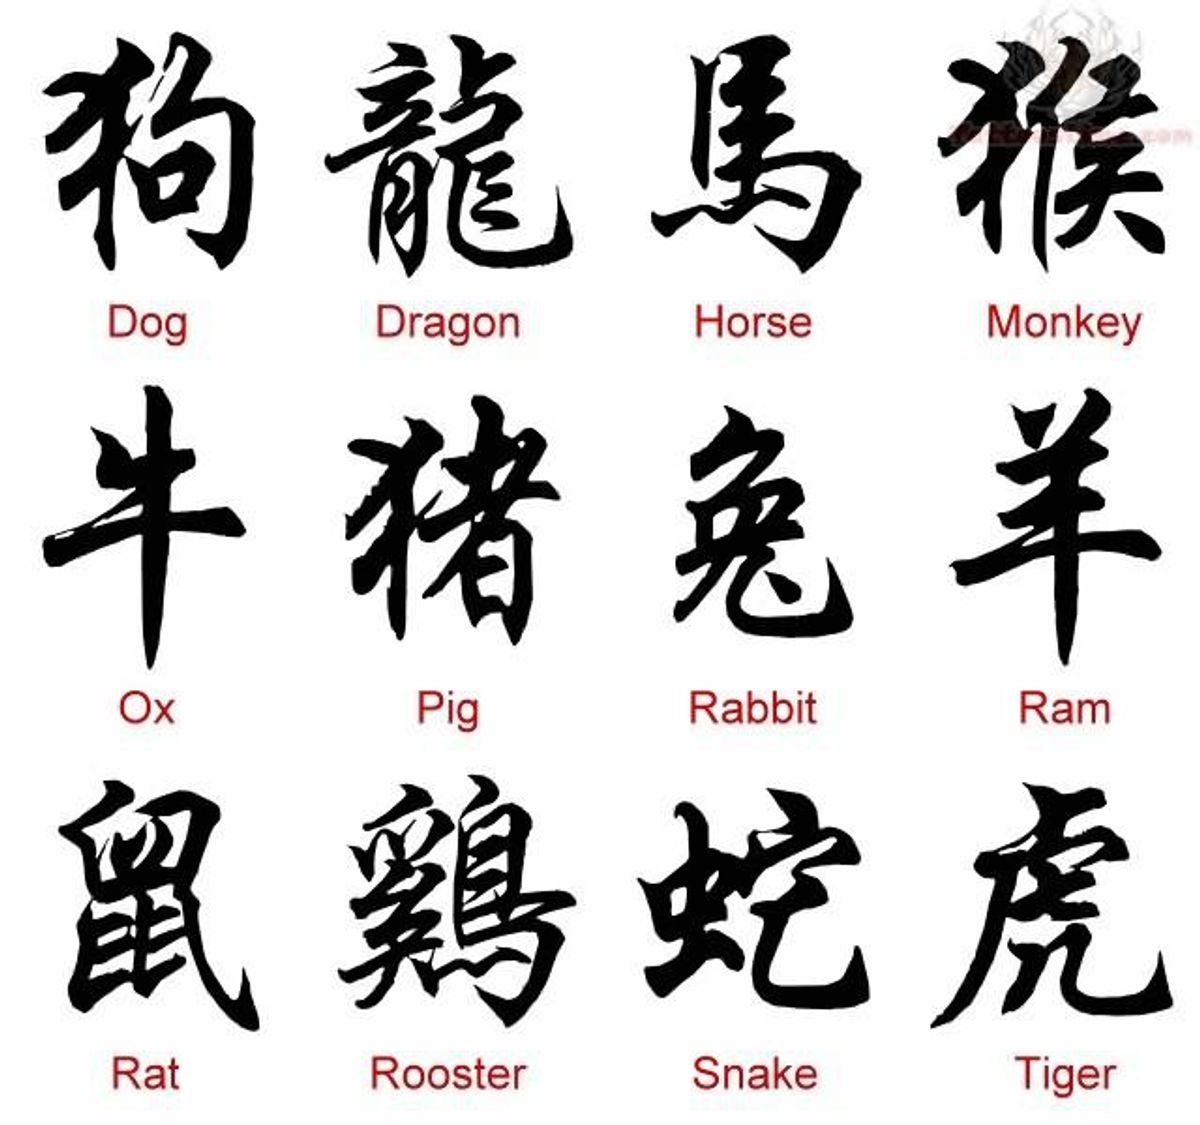 How To Learn Mandarin Chinese?